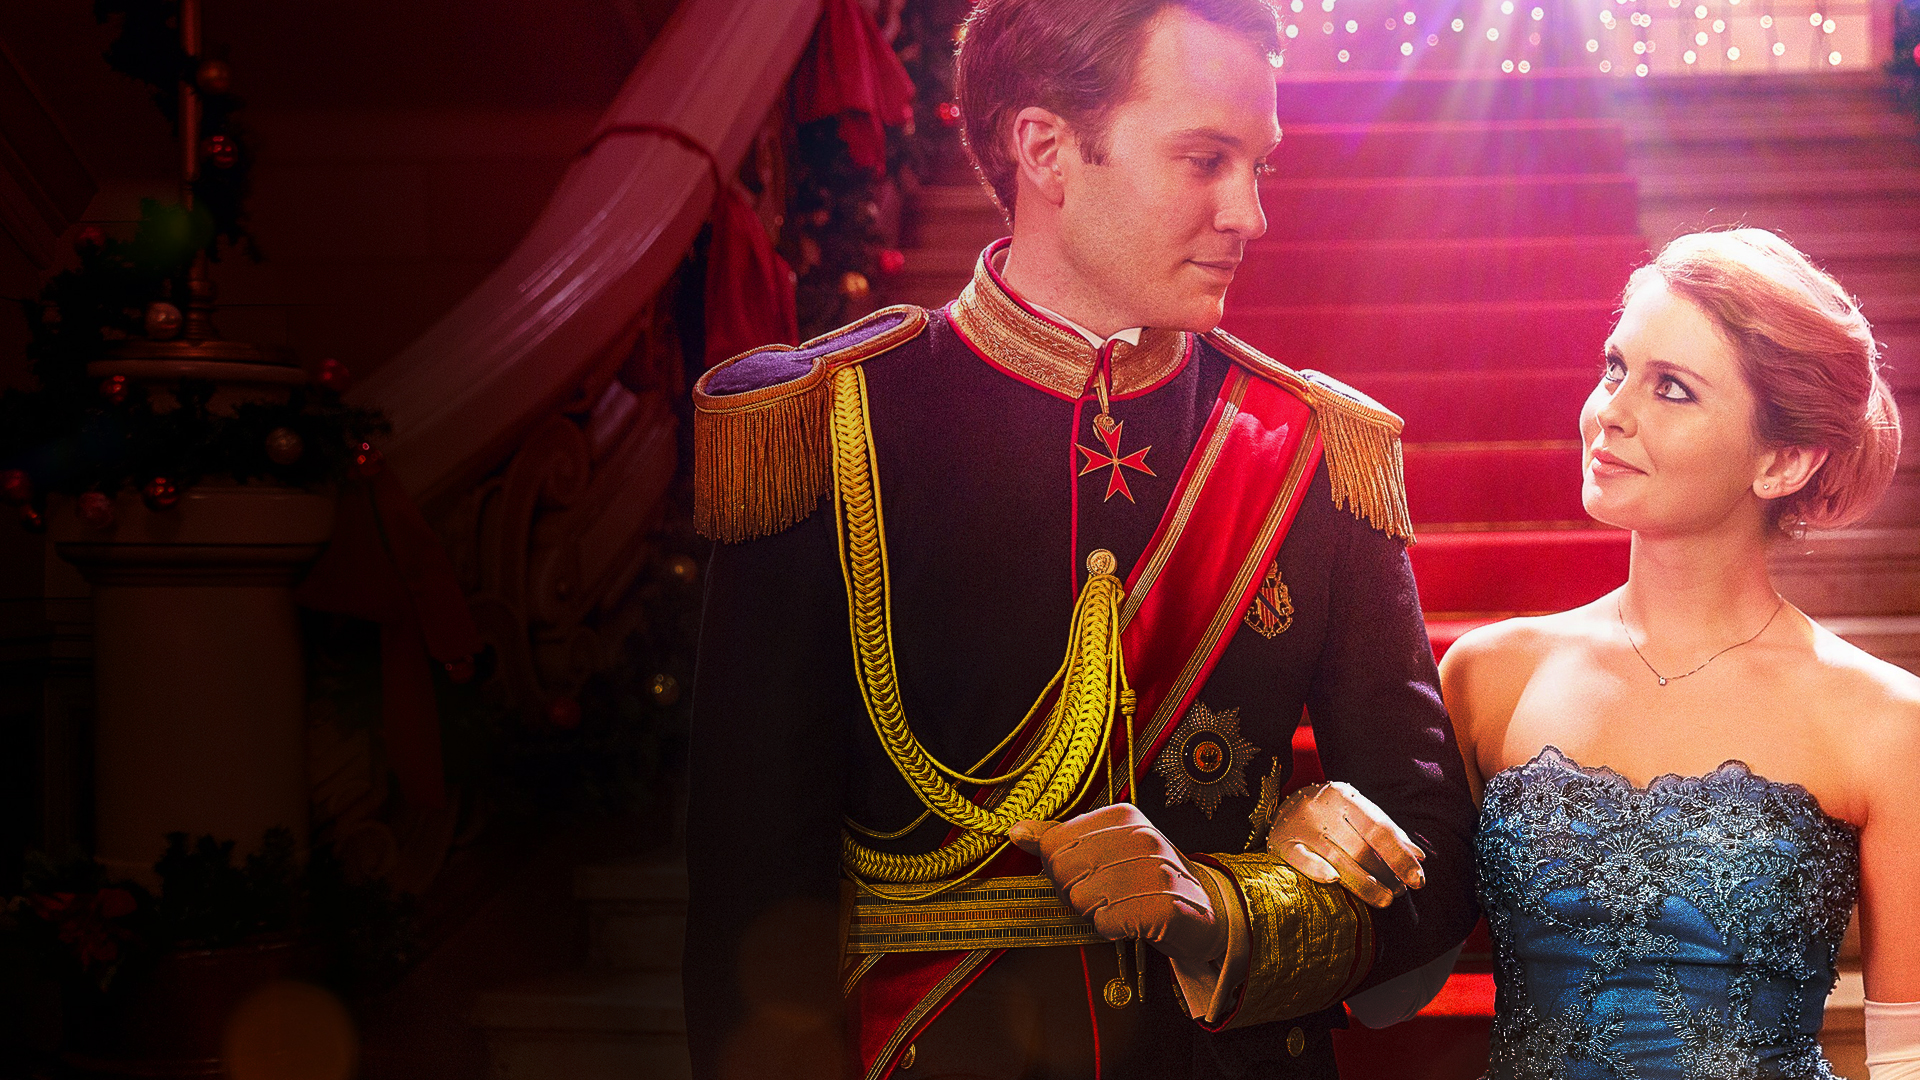 A Christmas Prince 2 The Royal Wedding Explained In my Ending Discussion Video On The Netflix Original Movie with my personal analysis and review roundup INTRO